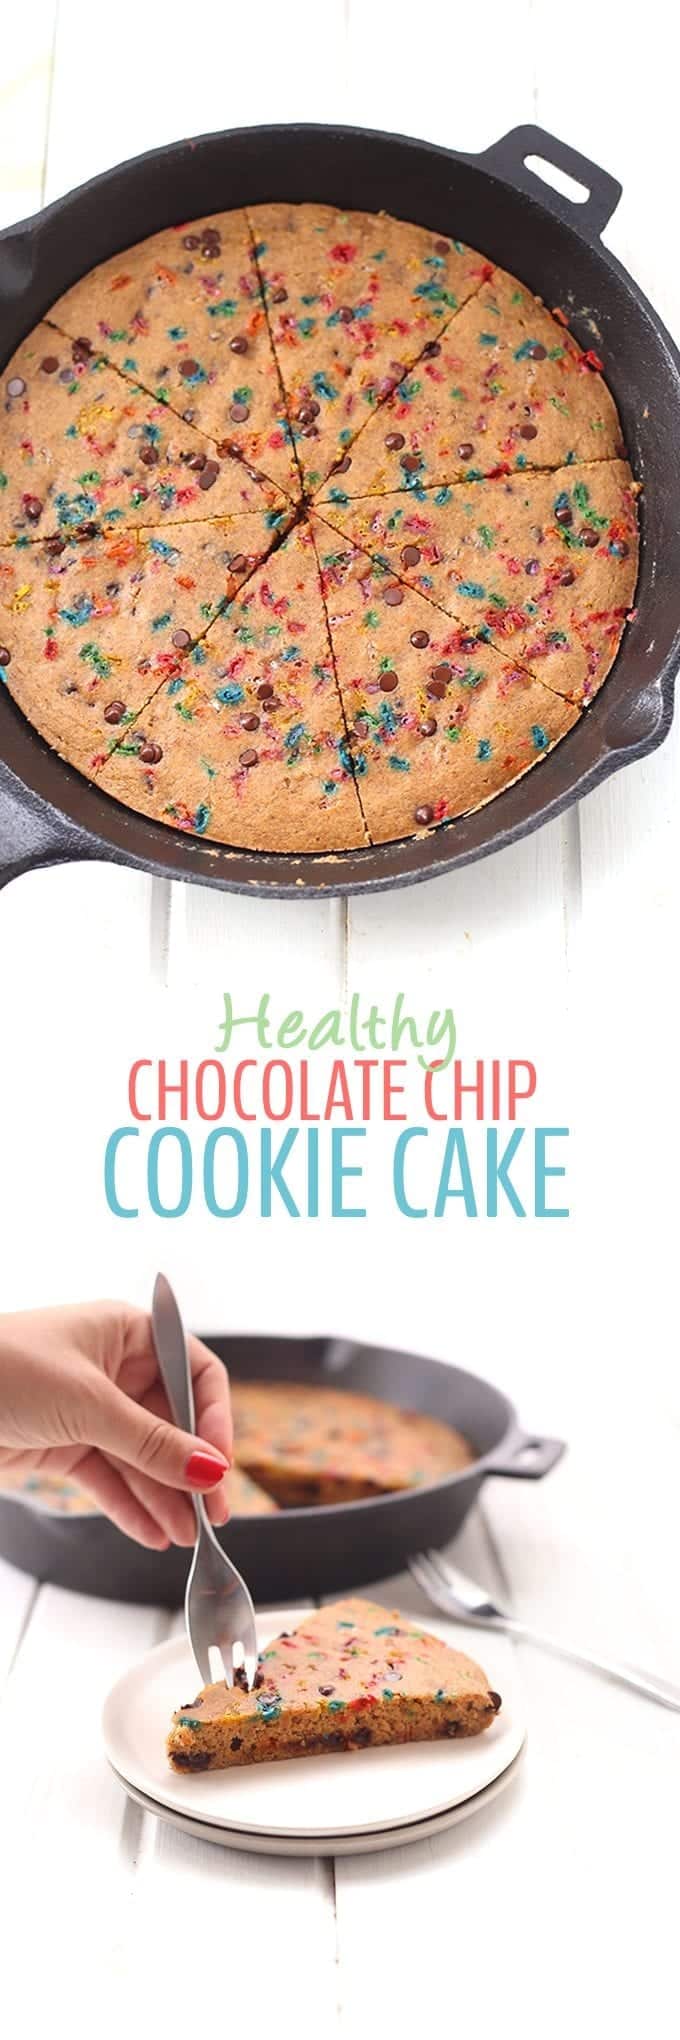 A recipe for Healthy Chocolate Chip Cookie Cake made with a secret ingredient! High in protein, and without any refined sugar, your celebrations will be the perfect combo of decadent and healthy!